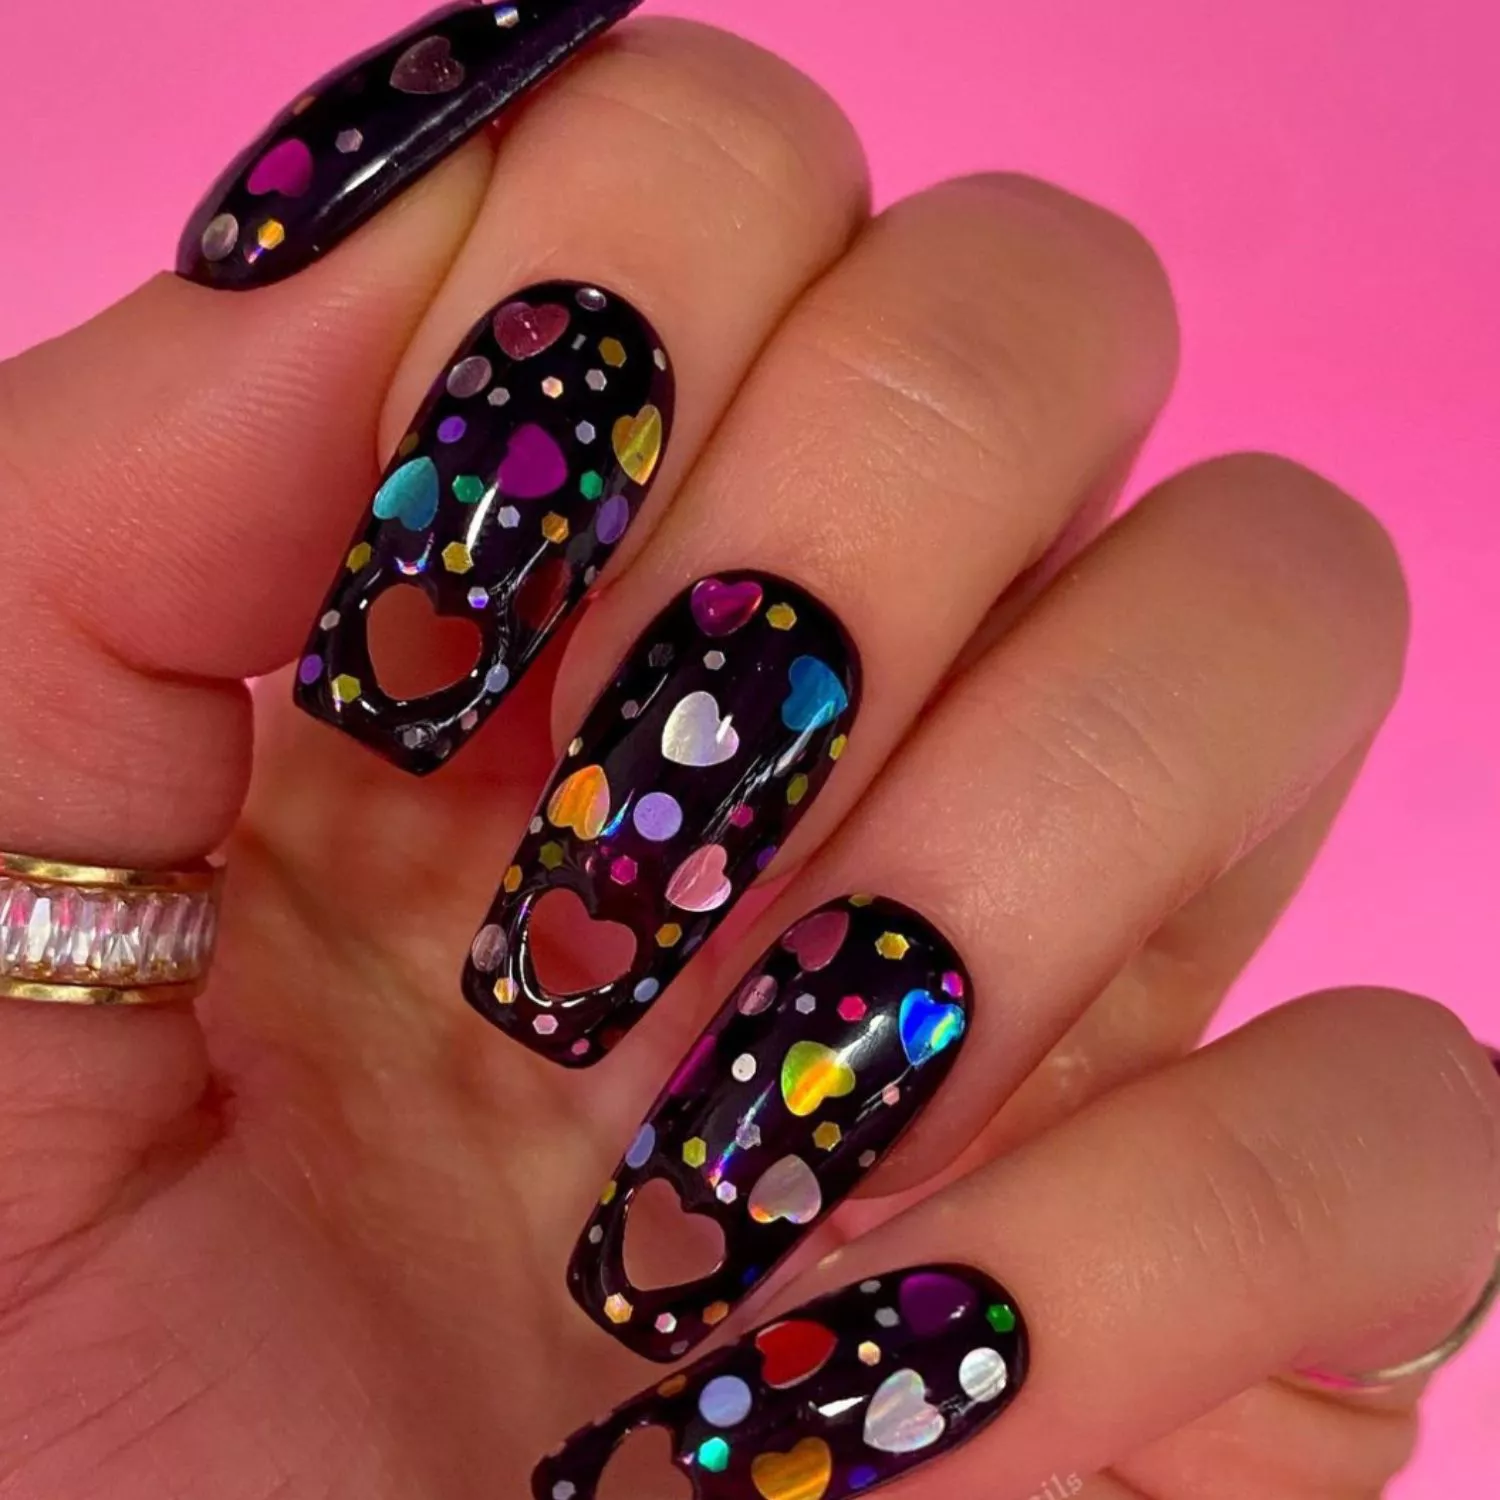 Long black manicure with colorful sparkles and hearts plus heart-shaped cutouts